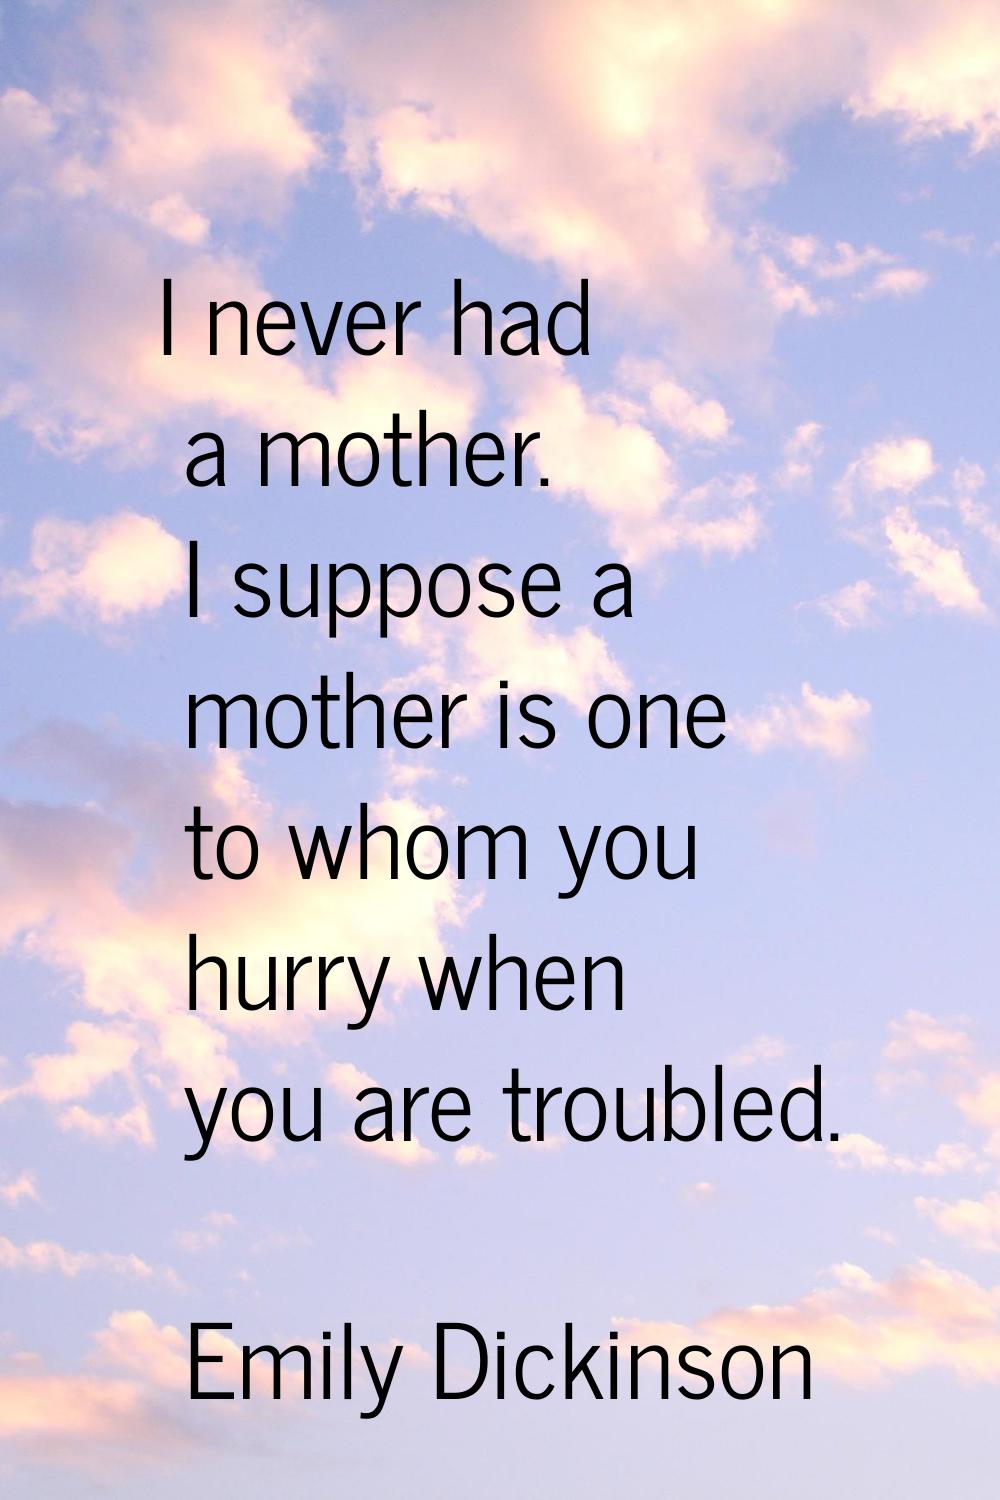 I never had a mother. I suppose a mother is one to whom you hurry when you are troubled.